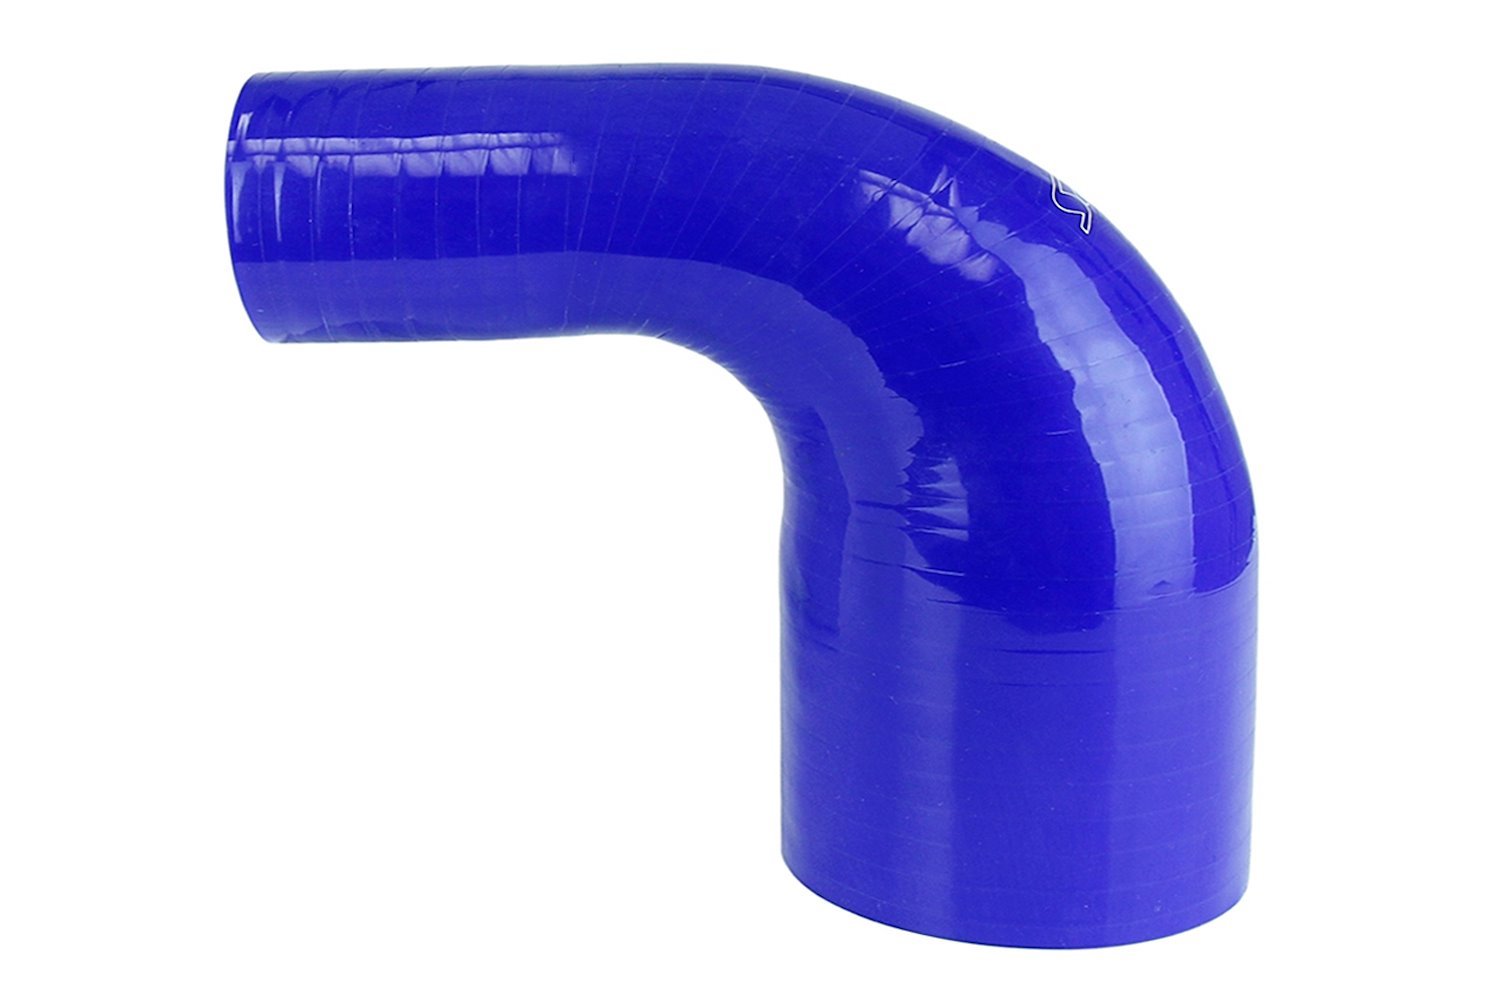 HTSER90-425-450-BLUE Silicone 90-Degree Elbow Hose, High-Temp 4-Ply Reinforced, 4-1/4 in. - 4-1/2 in. ID, Blue